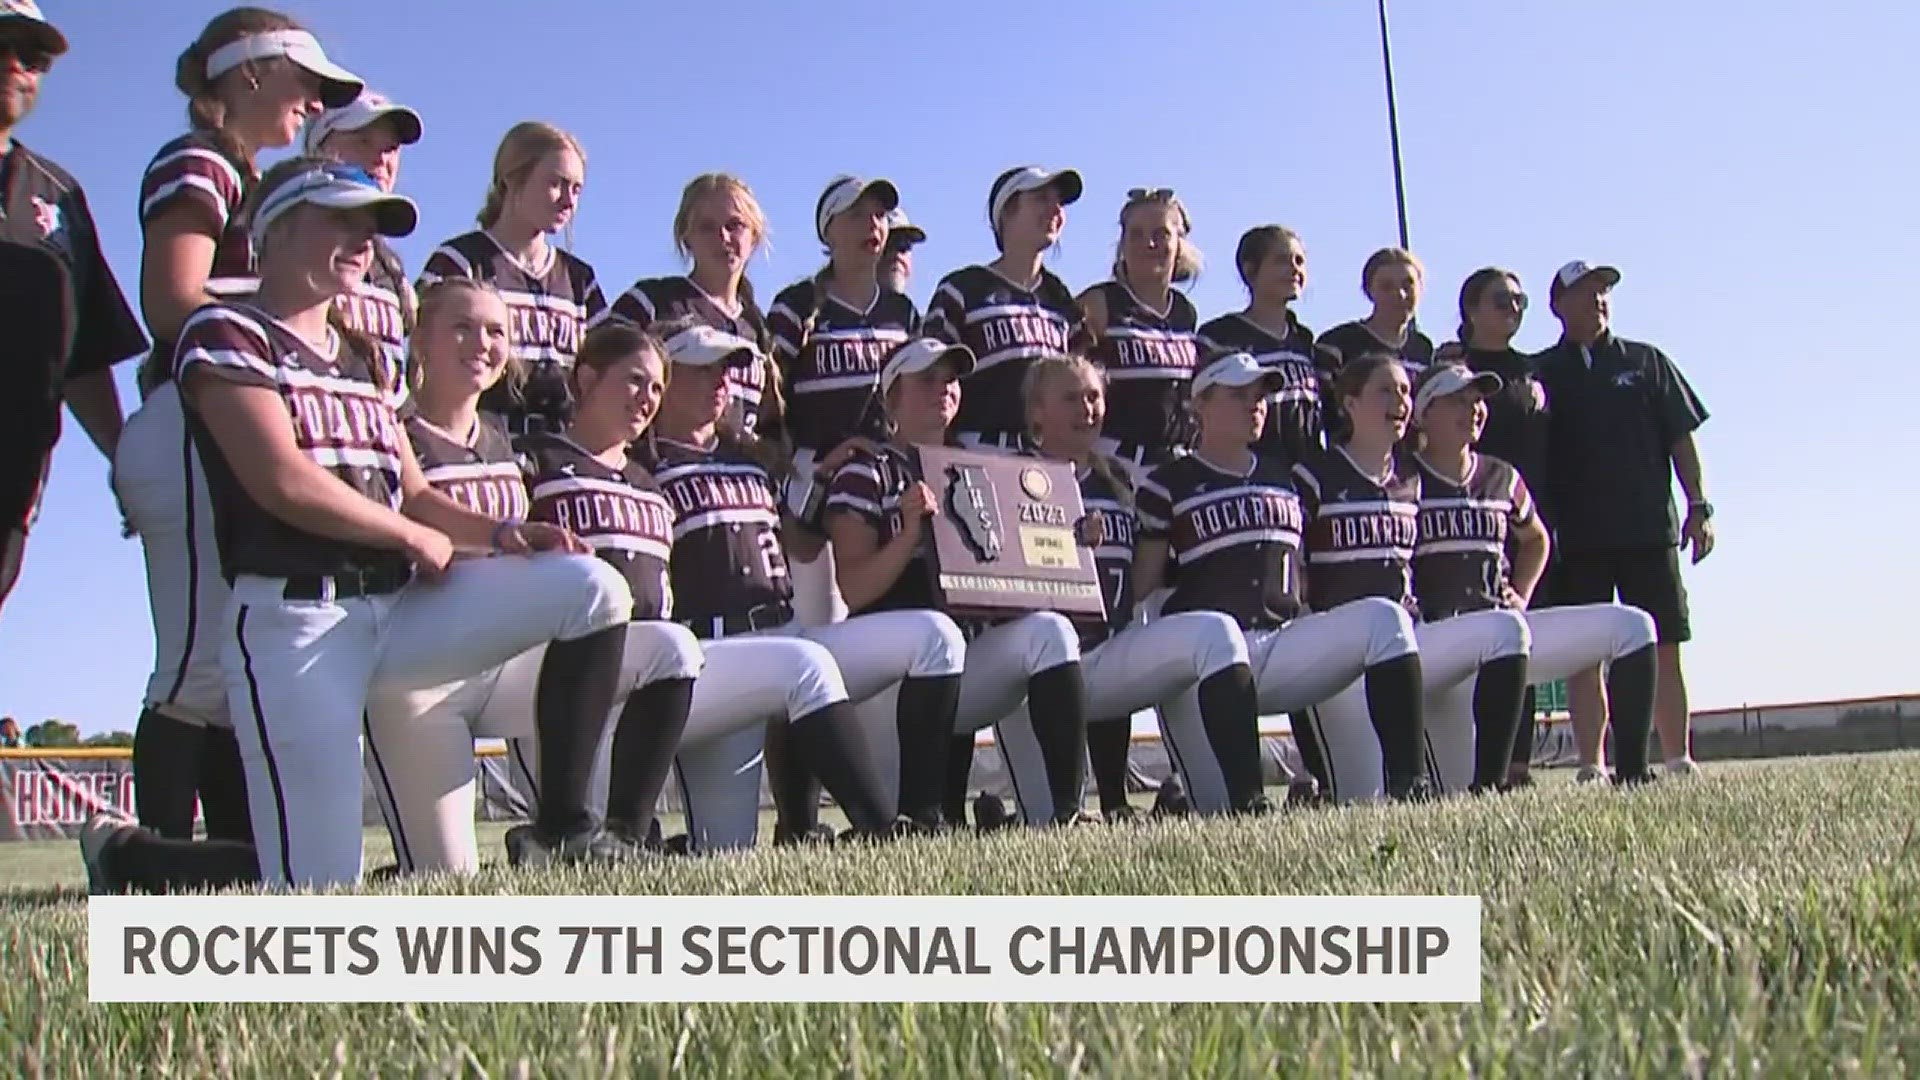 Rockridge blast past Tremont 12-2 on their way to another Sectional Championship. The Rockets hit 4 home runs in the game, including a grand slam from Kendra Lewis.